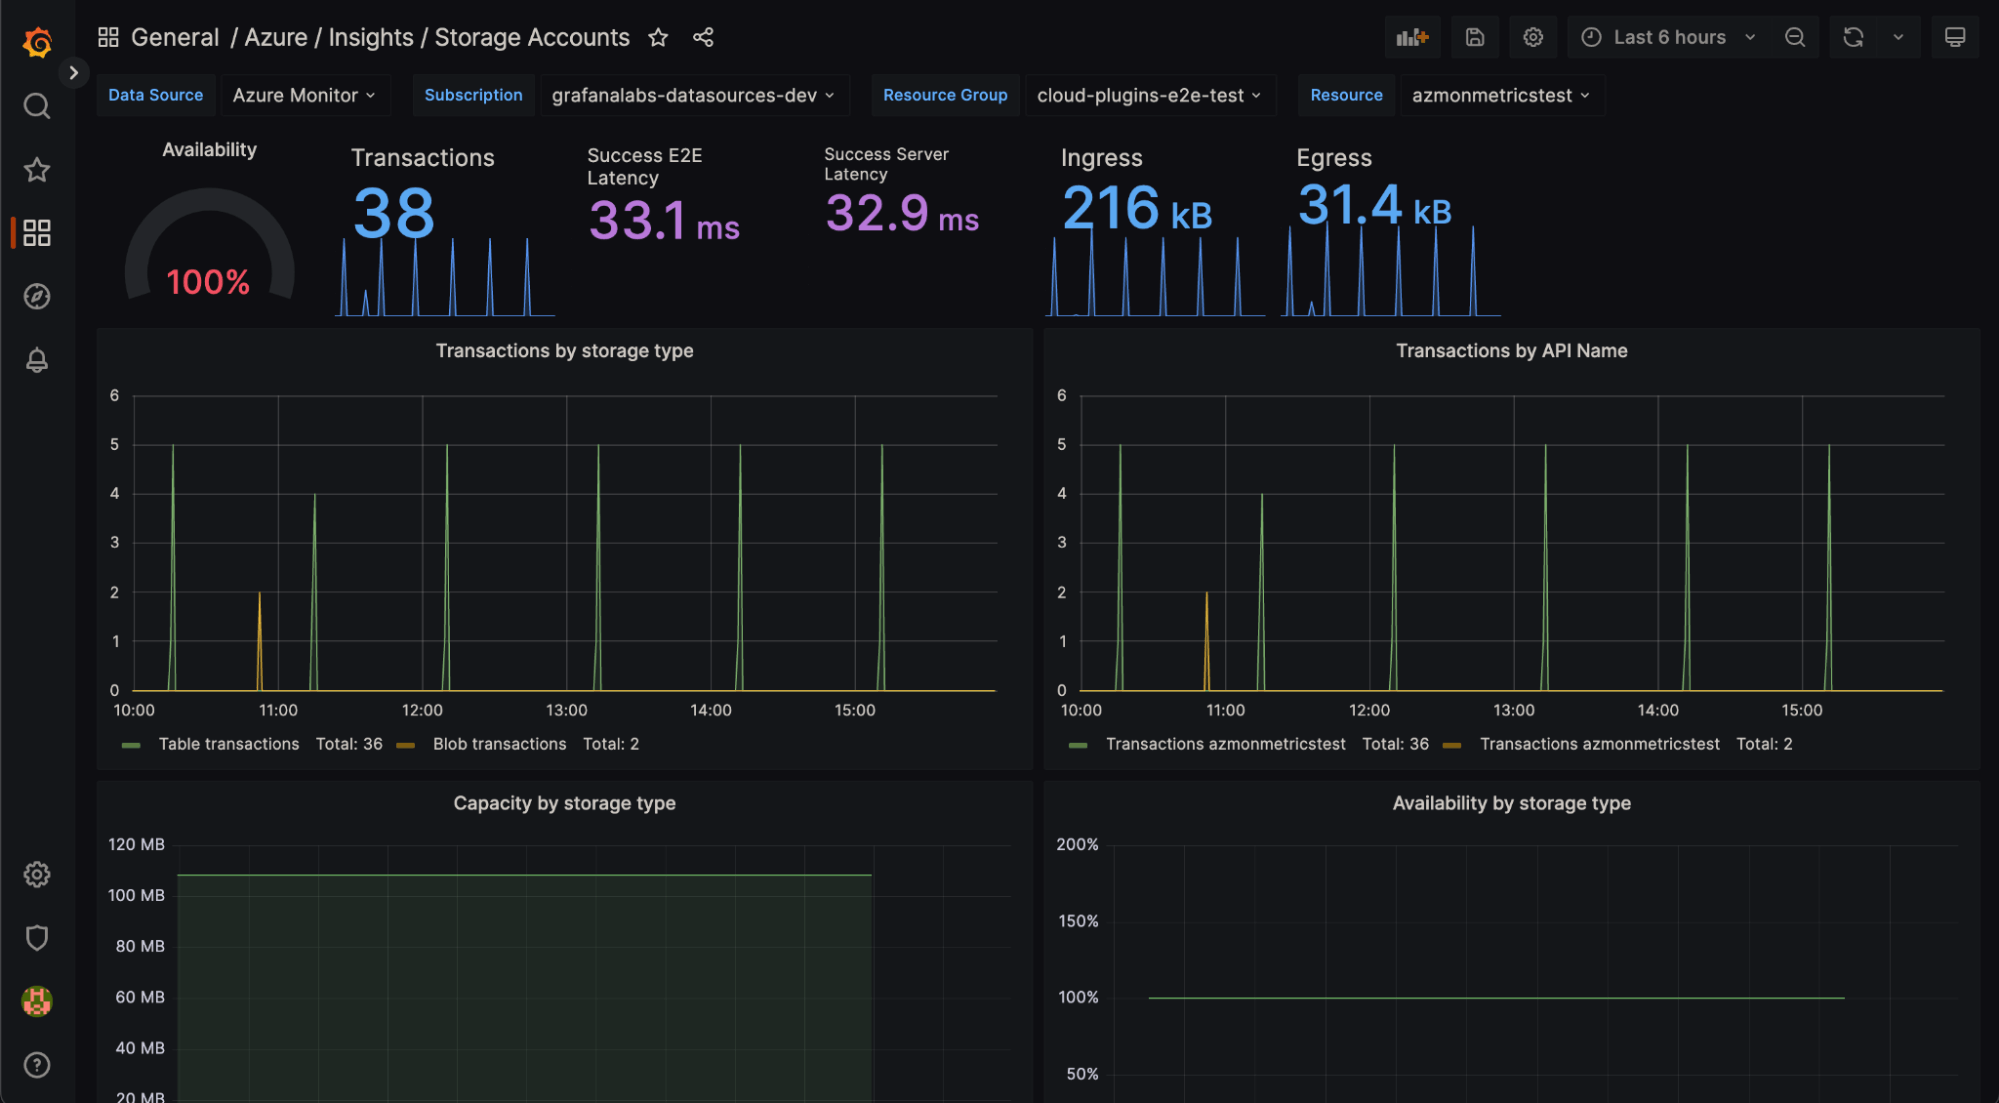 A Grafana dashboard displays insights from an Azure storage account.